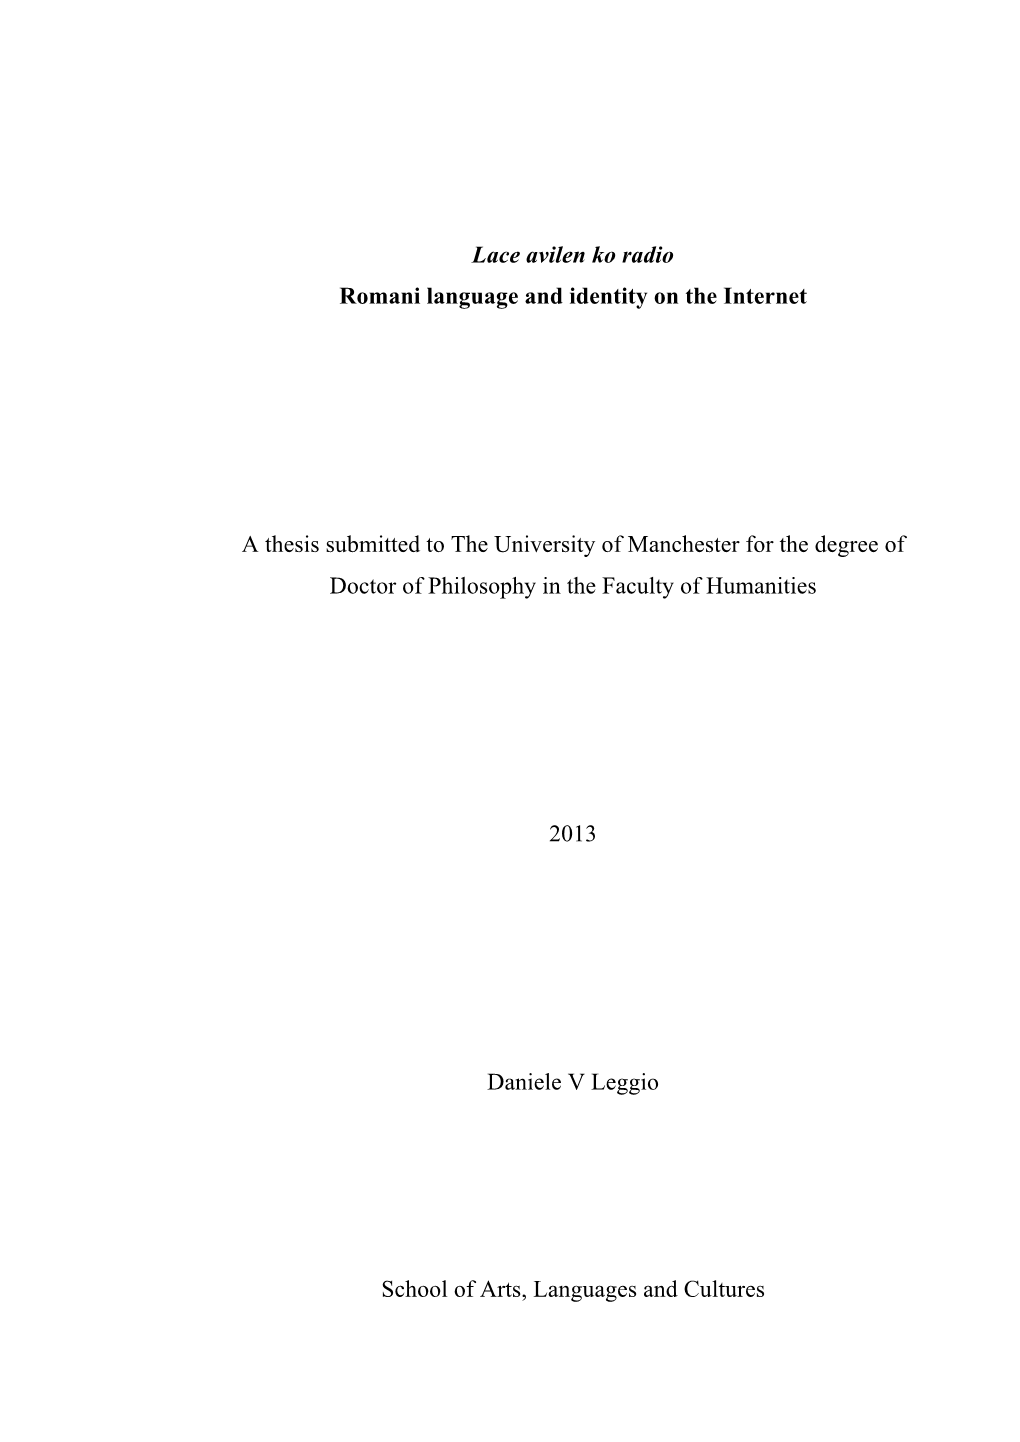 Lace Avilen Ko Radio Romani Language and Identity on the Internet a Thesis Submitted to the University of Manchester for The